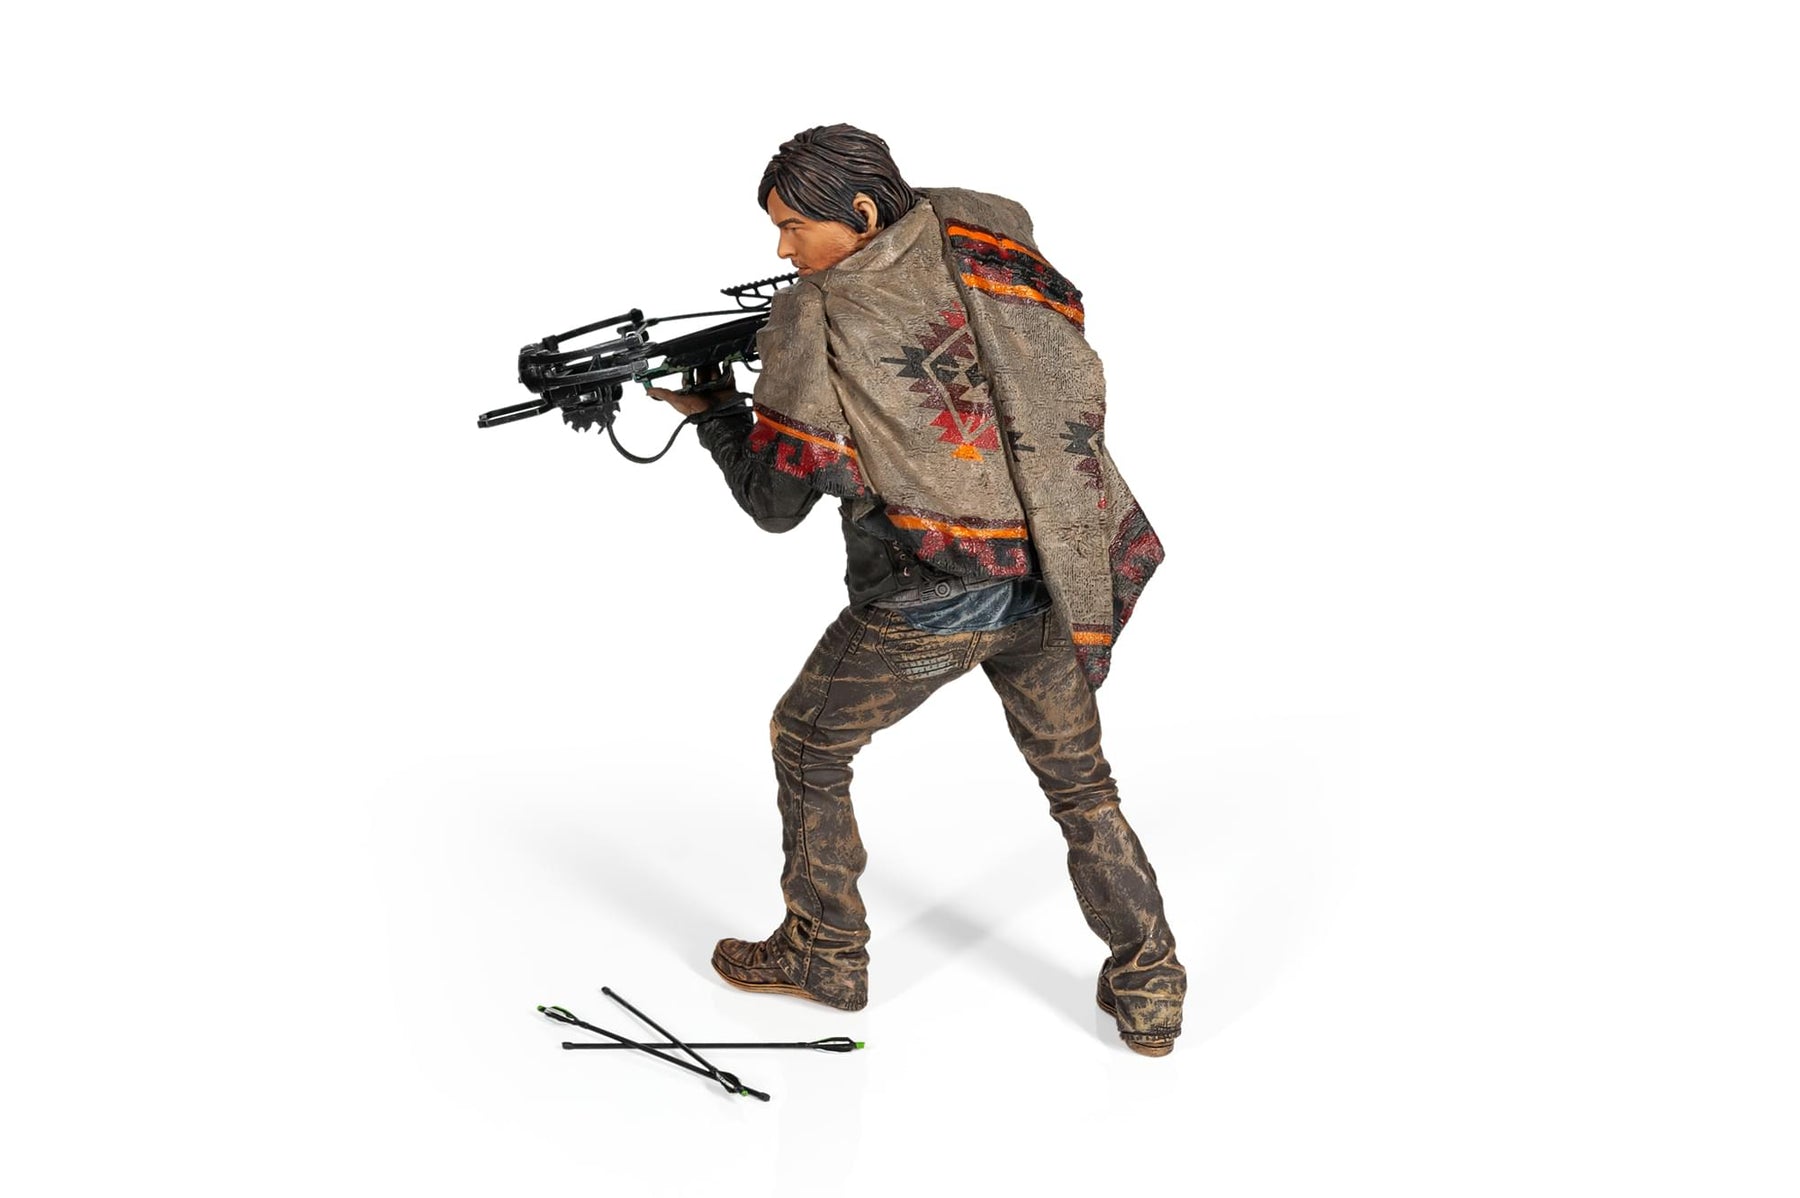 The Walking Dead Daryl Dixon Deluxe Poseable Figure | Measures 10 Inches Tall